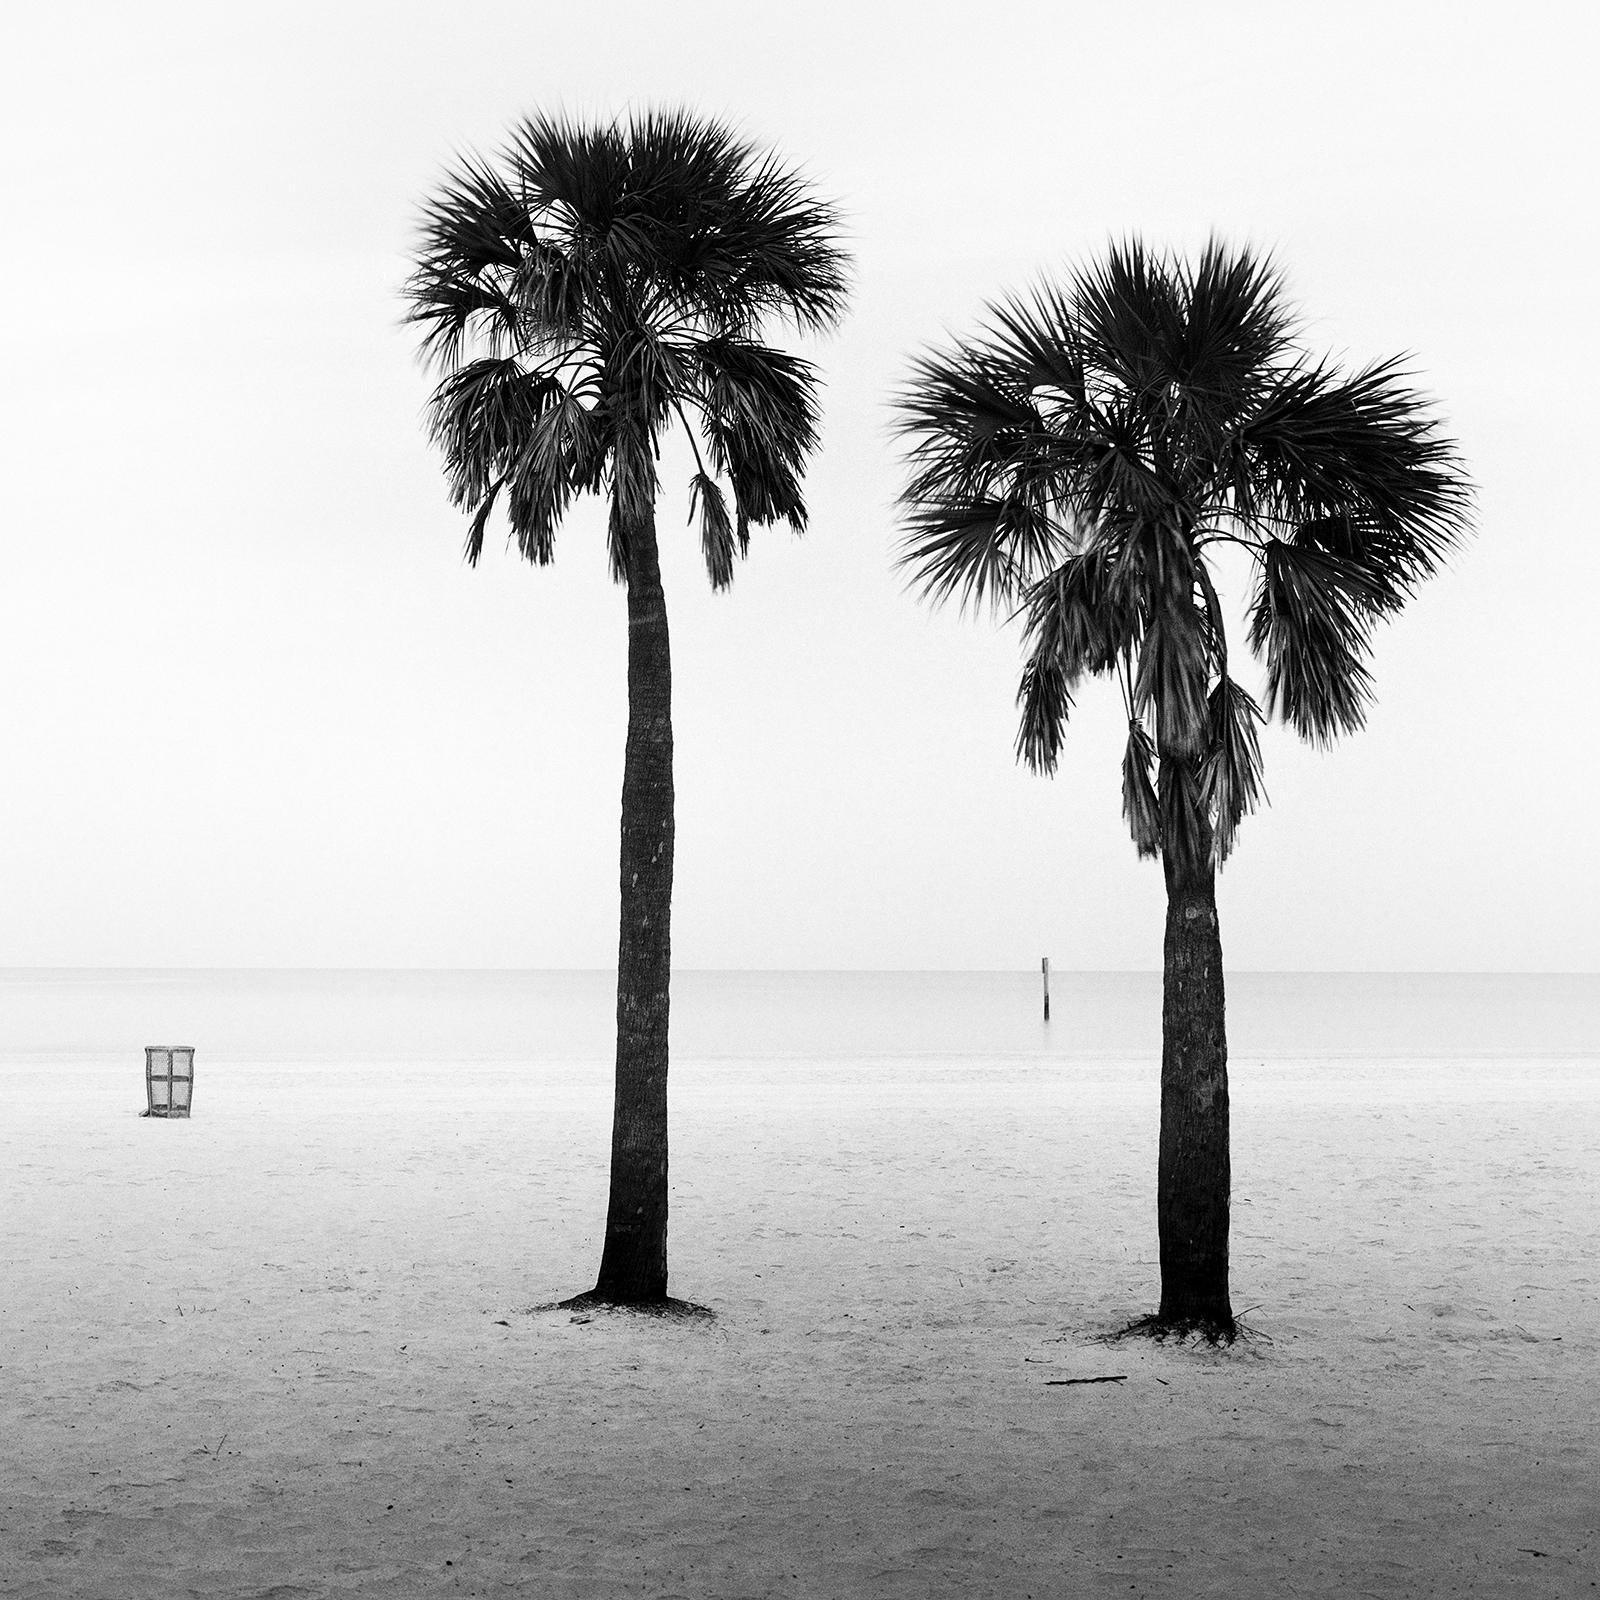 Two Palms, deserted beach, Florida, USA, Black and White landscape photography For Sale 3